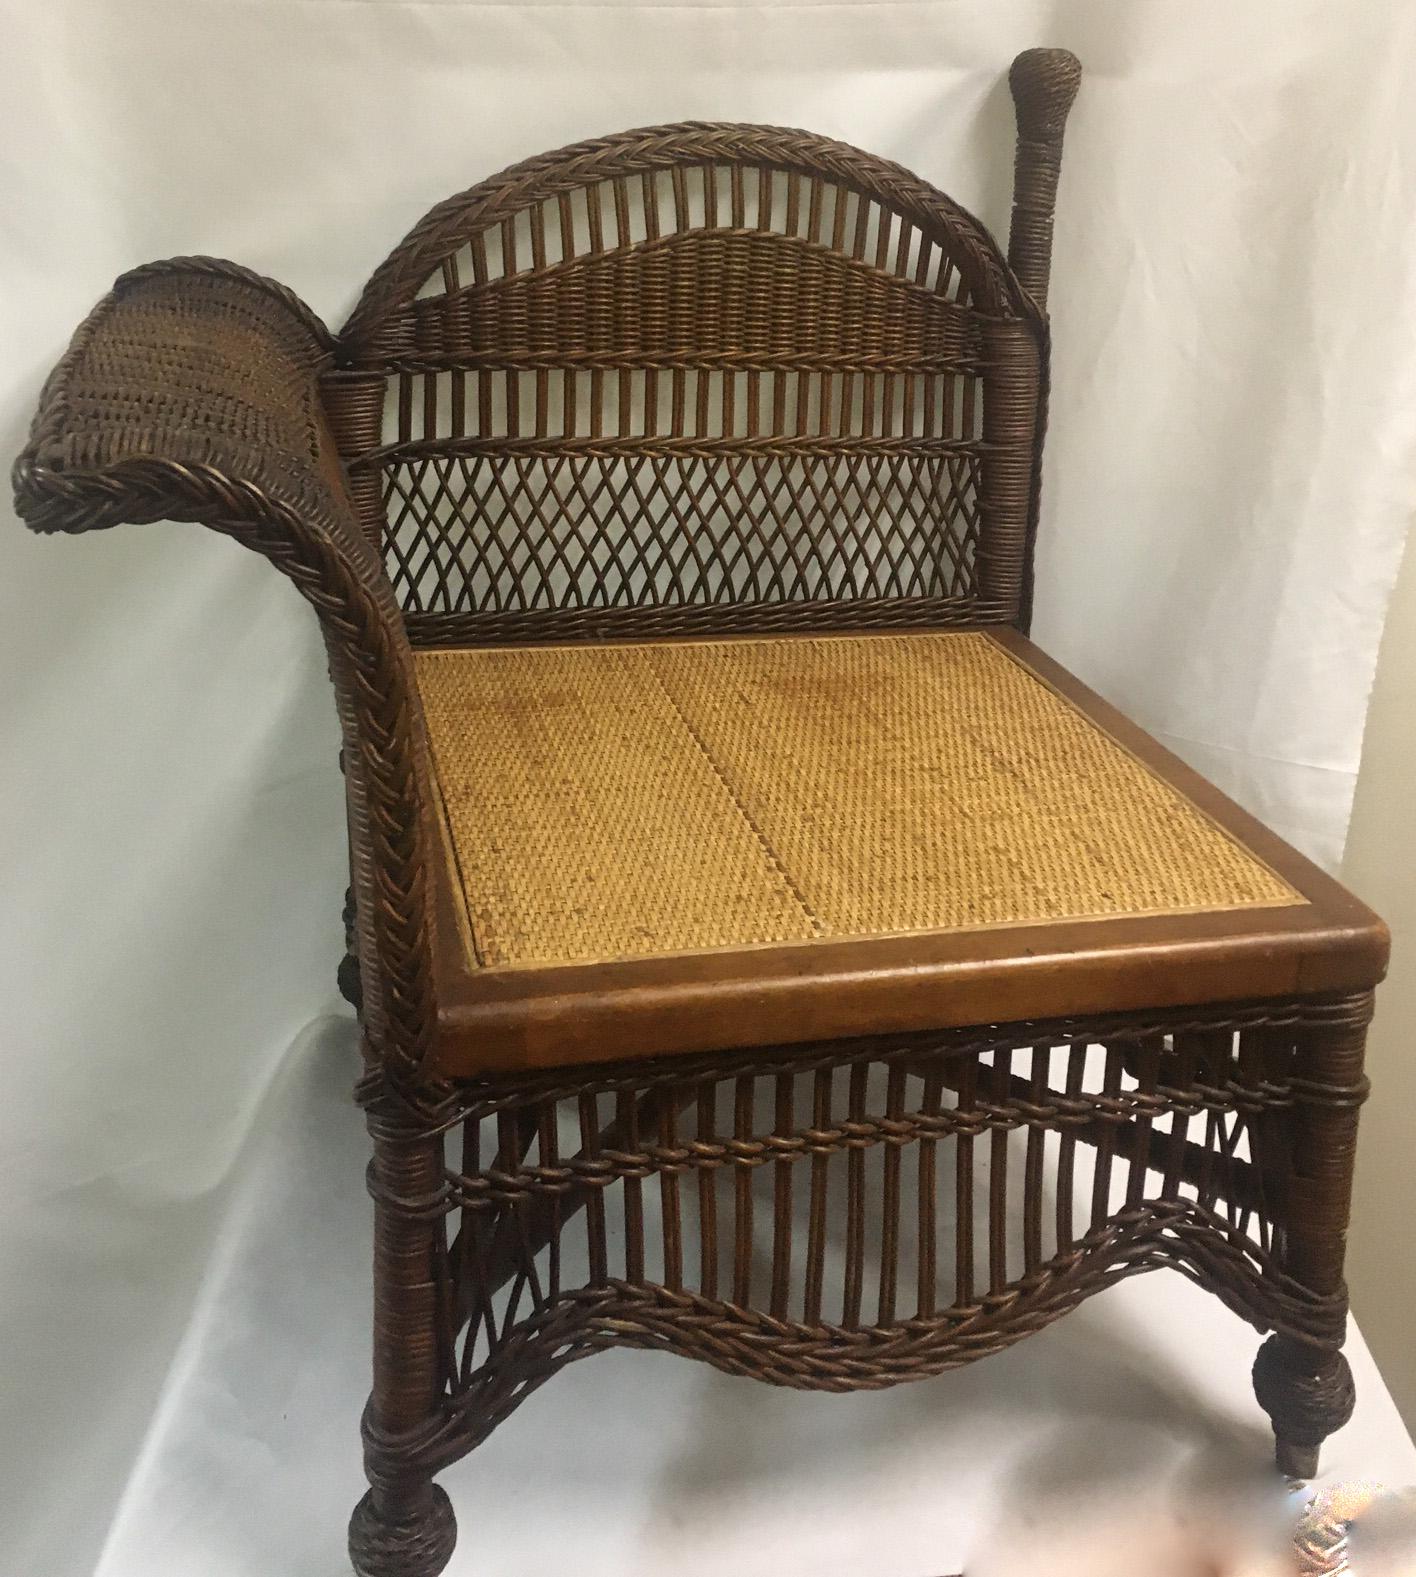 Heywood Wakefield Natural Wicker Divan or Photographer's Chair circa 1900 For Sale 1